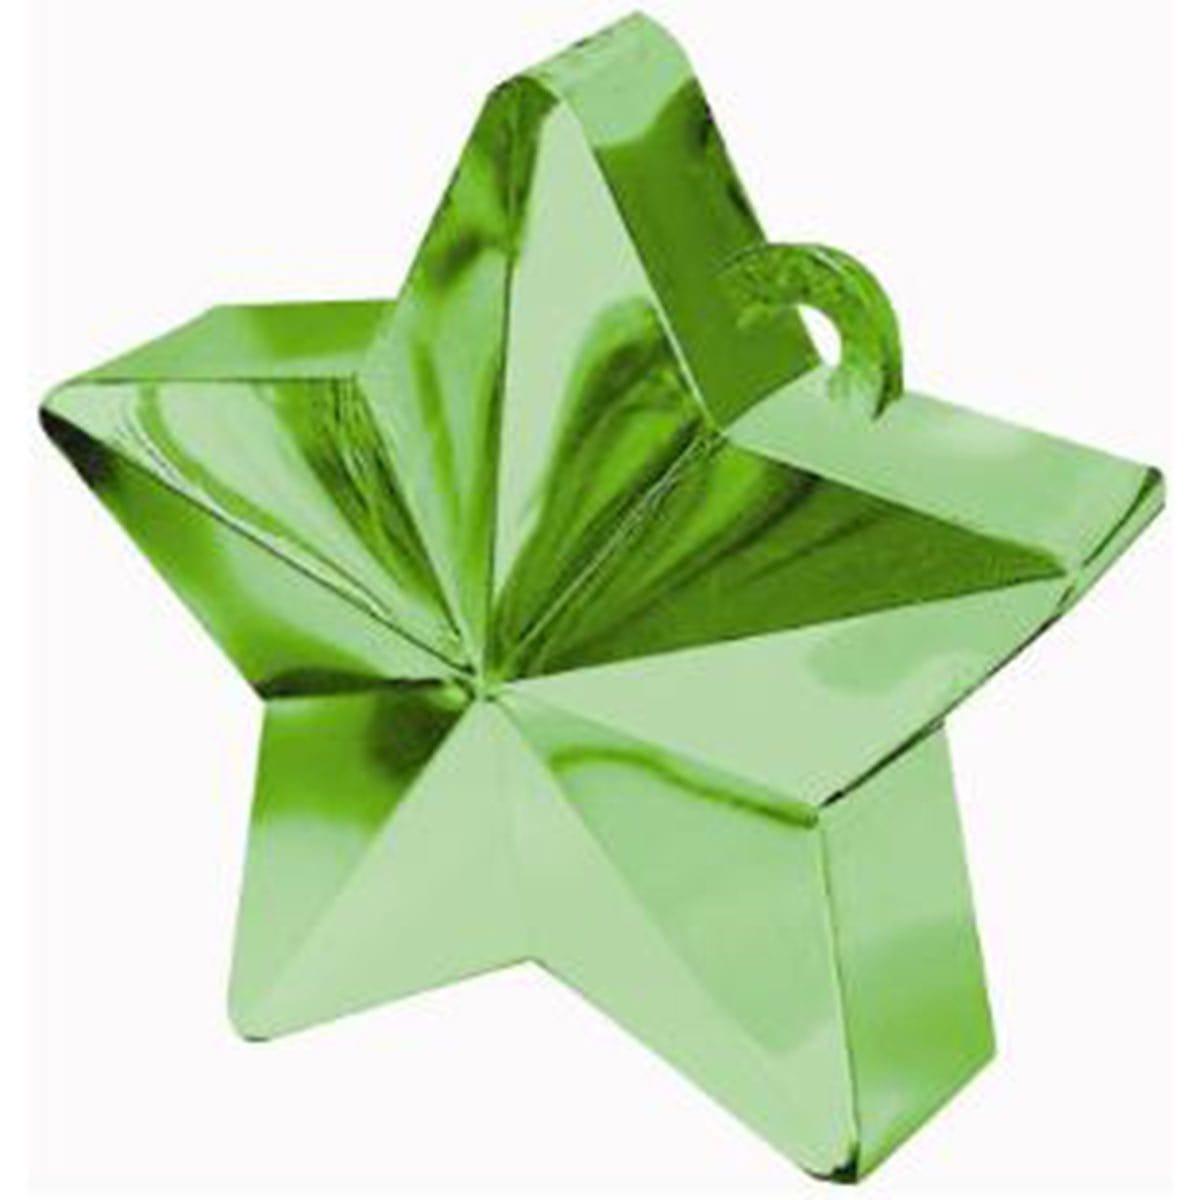 Buy balloons Green Star Balloon Weight sold at Party Expert